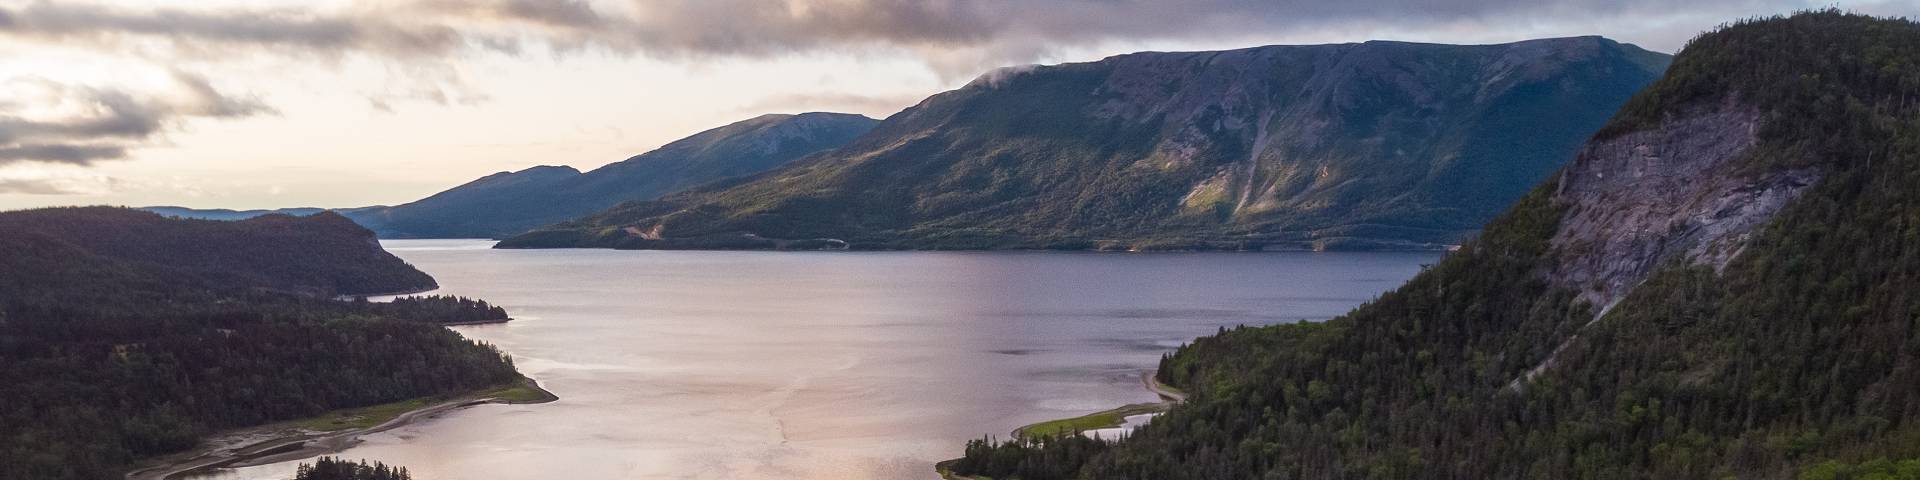 A view looking at the waters of Bonne Bay and the cliffs surrounding it in Gros Morne National Park